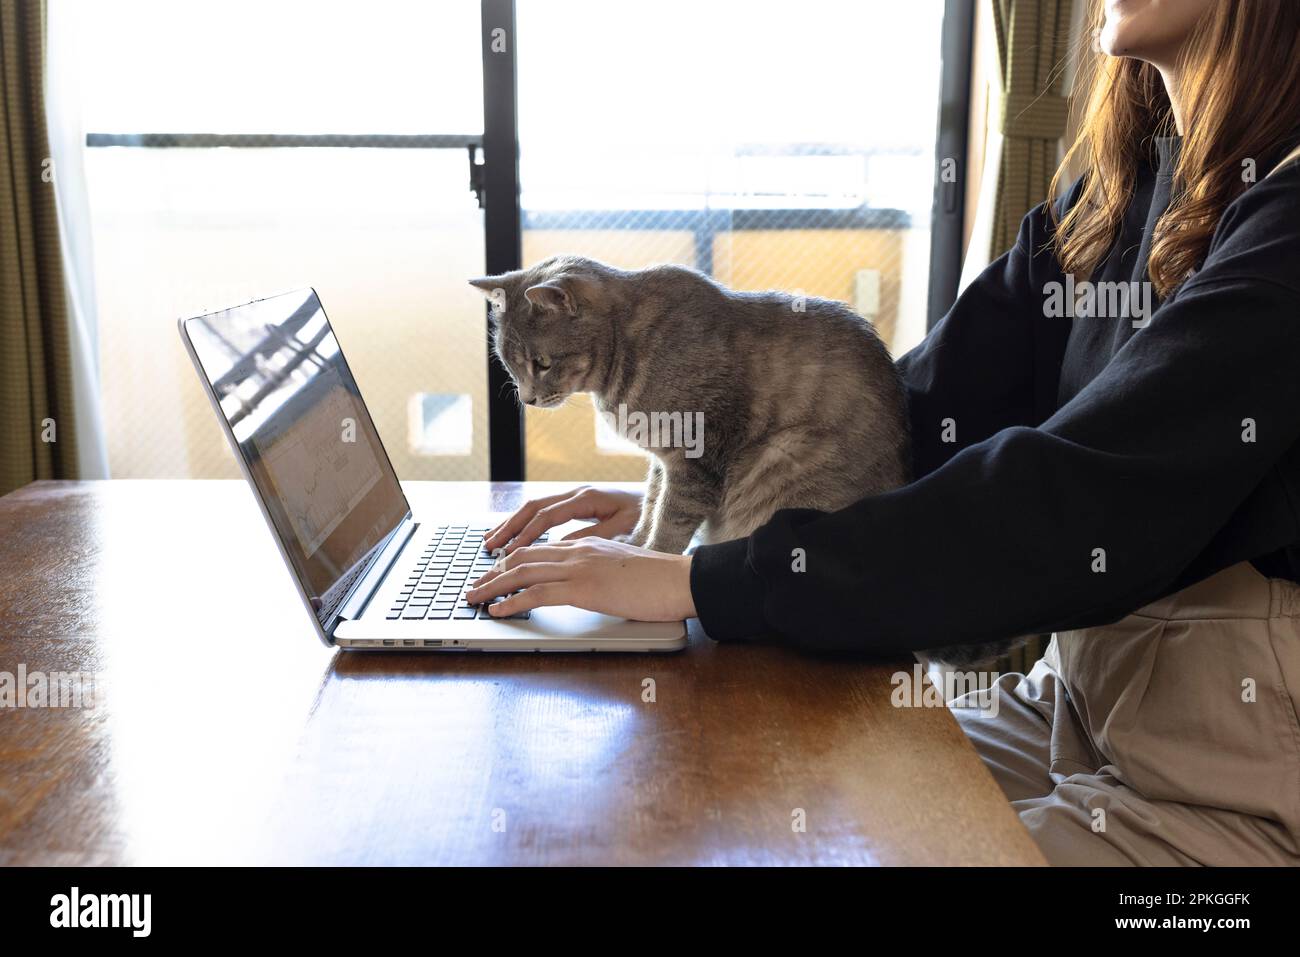 Woman's hand and cat working on laptop computer Stock Photo